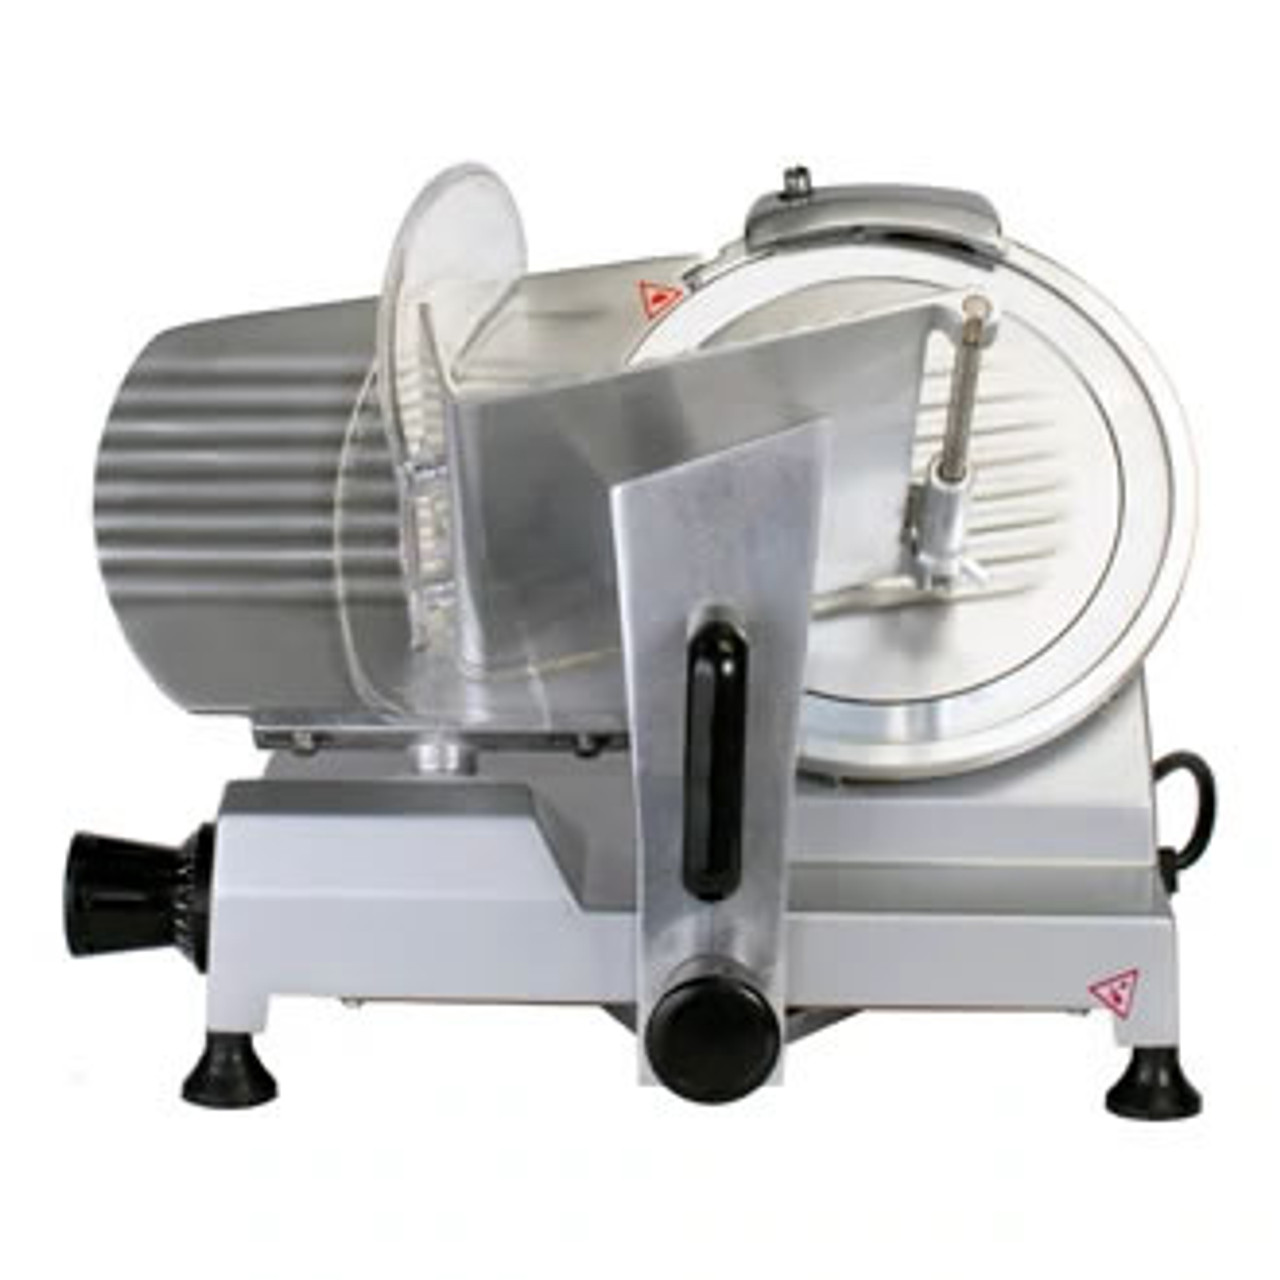 Waring Commercial 12” Professional Food Slicer, Silver